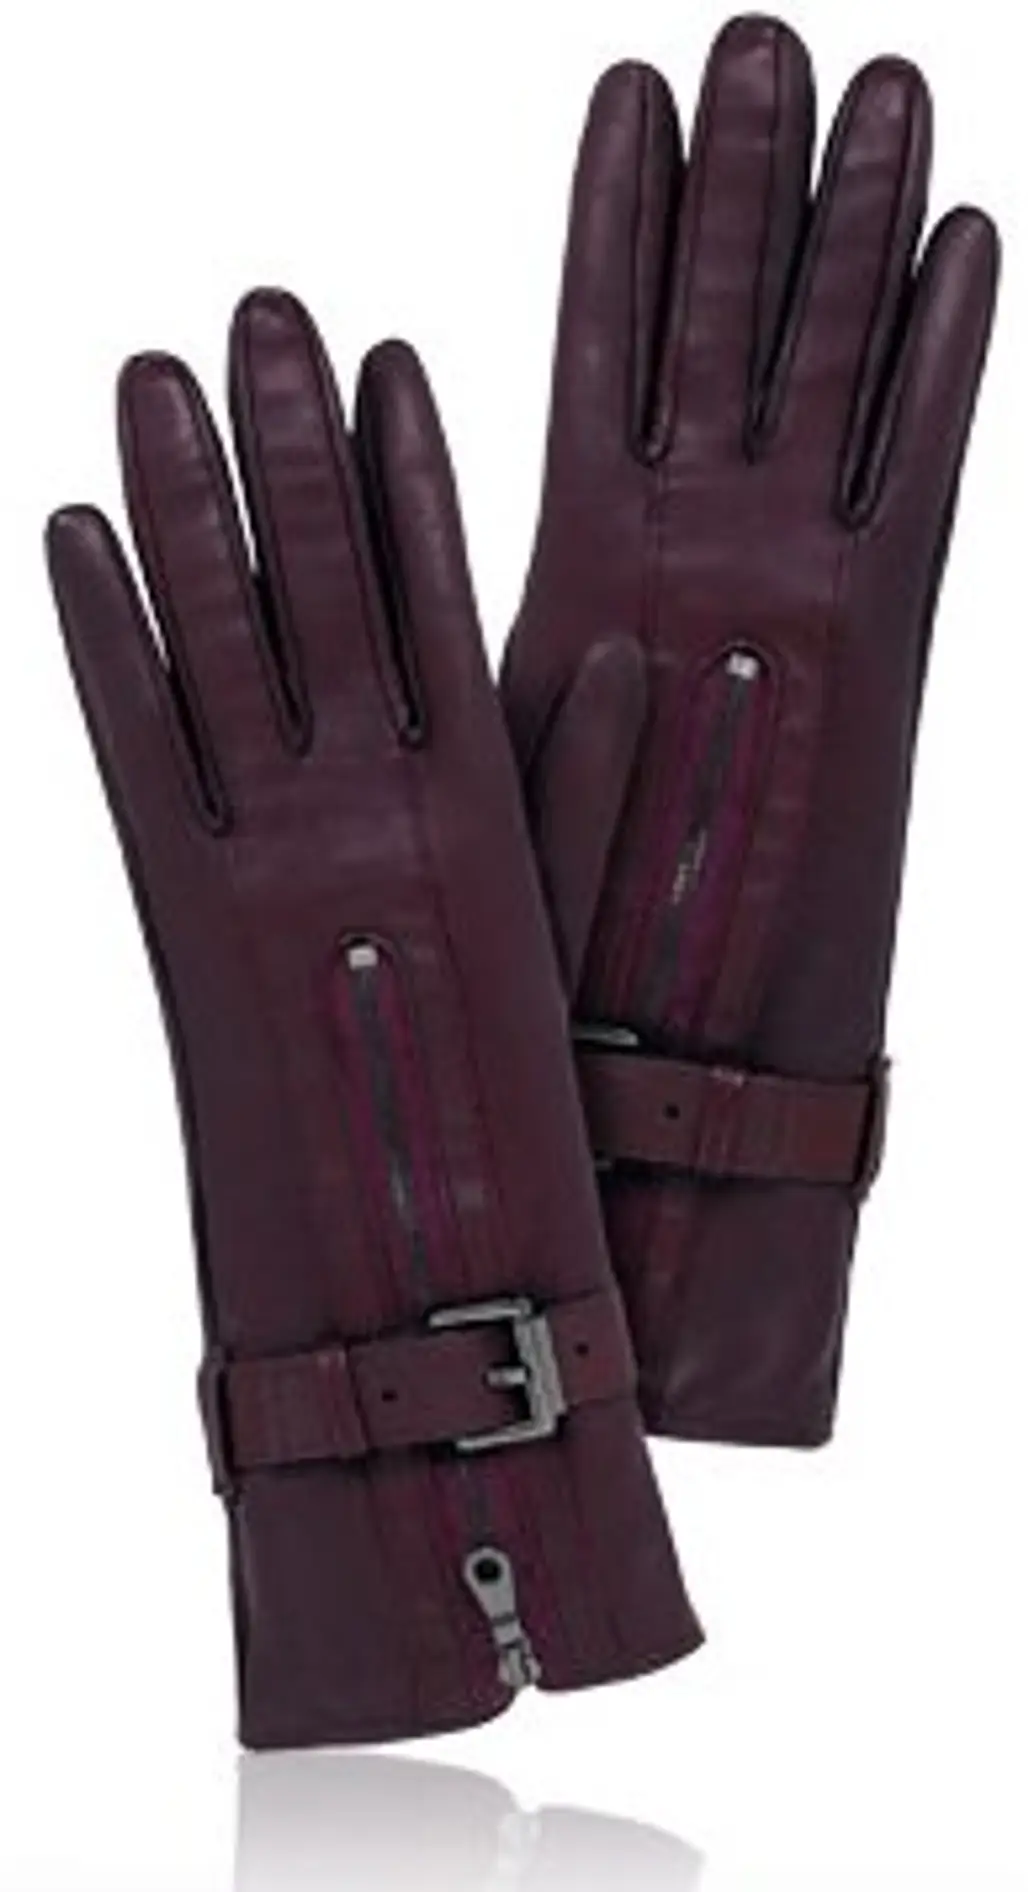 Mulberry Women’s Mabel Gloves in Rouge Noir Nappa Leather